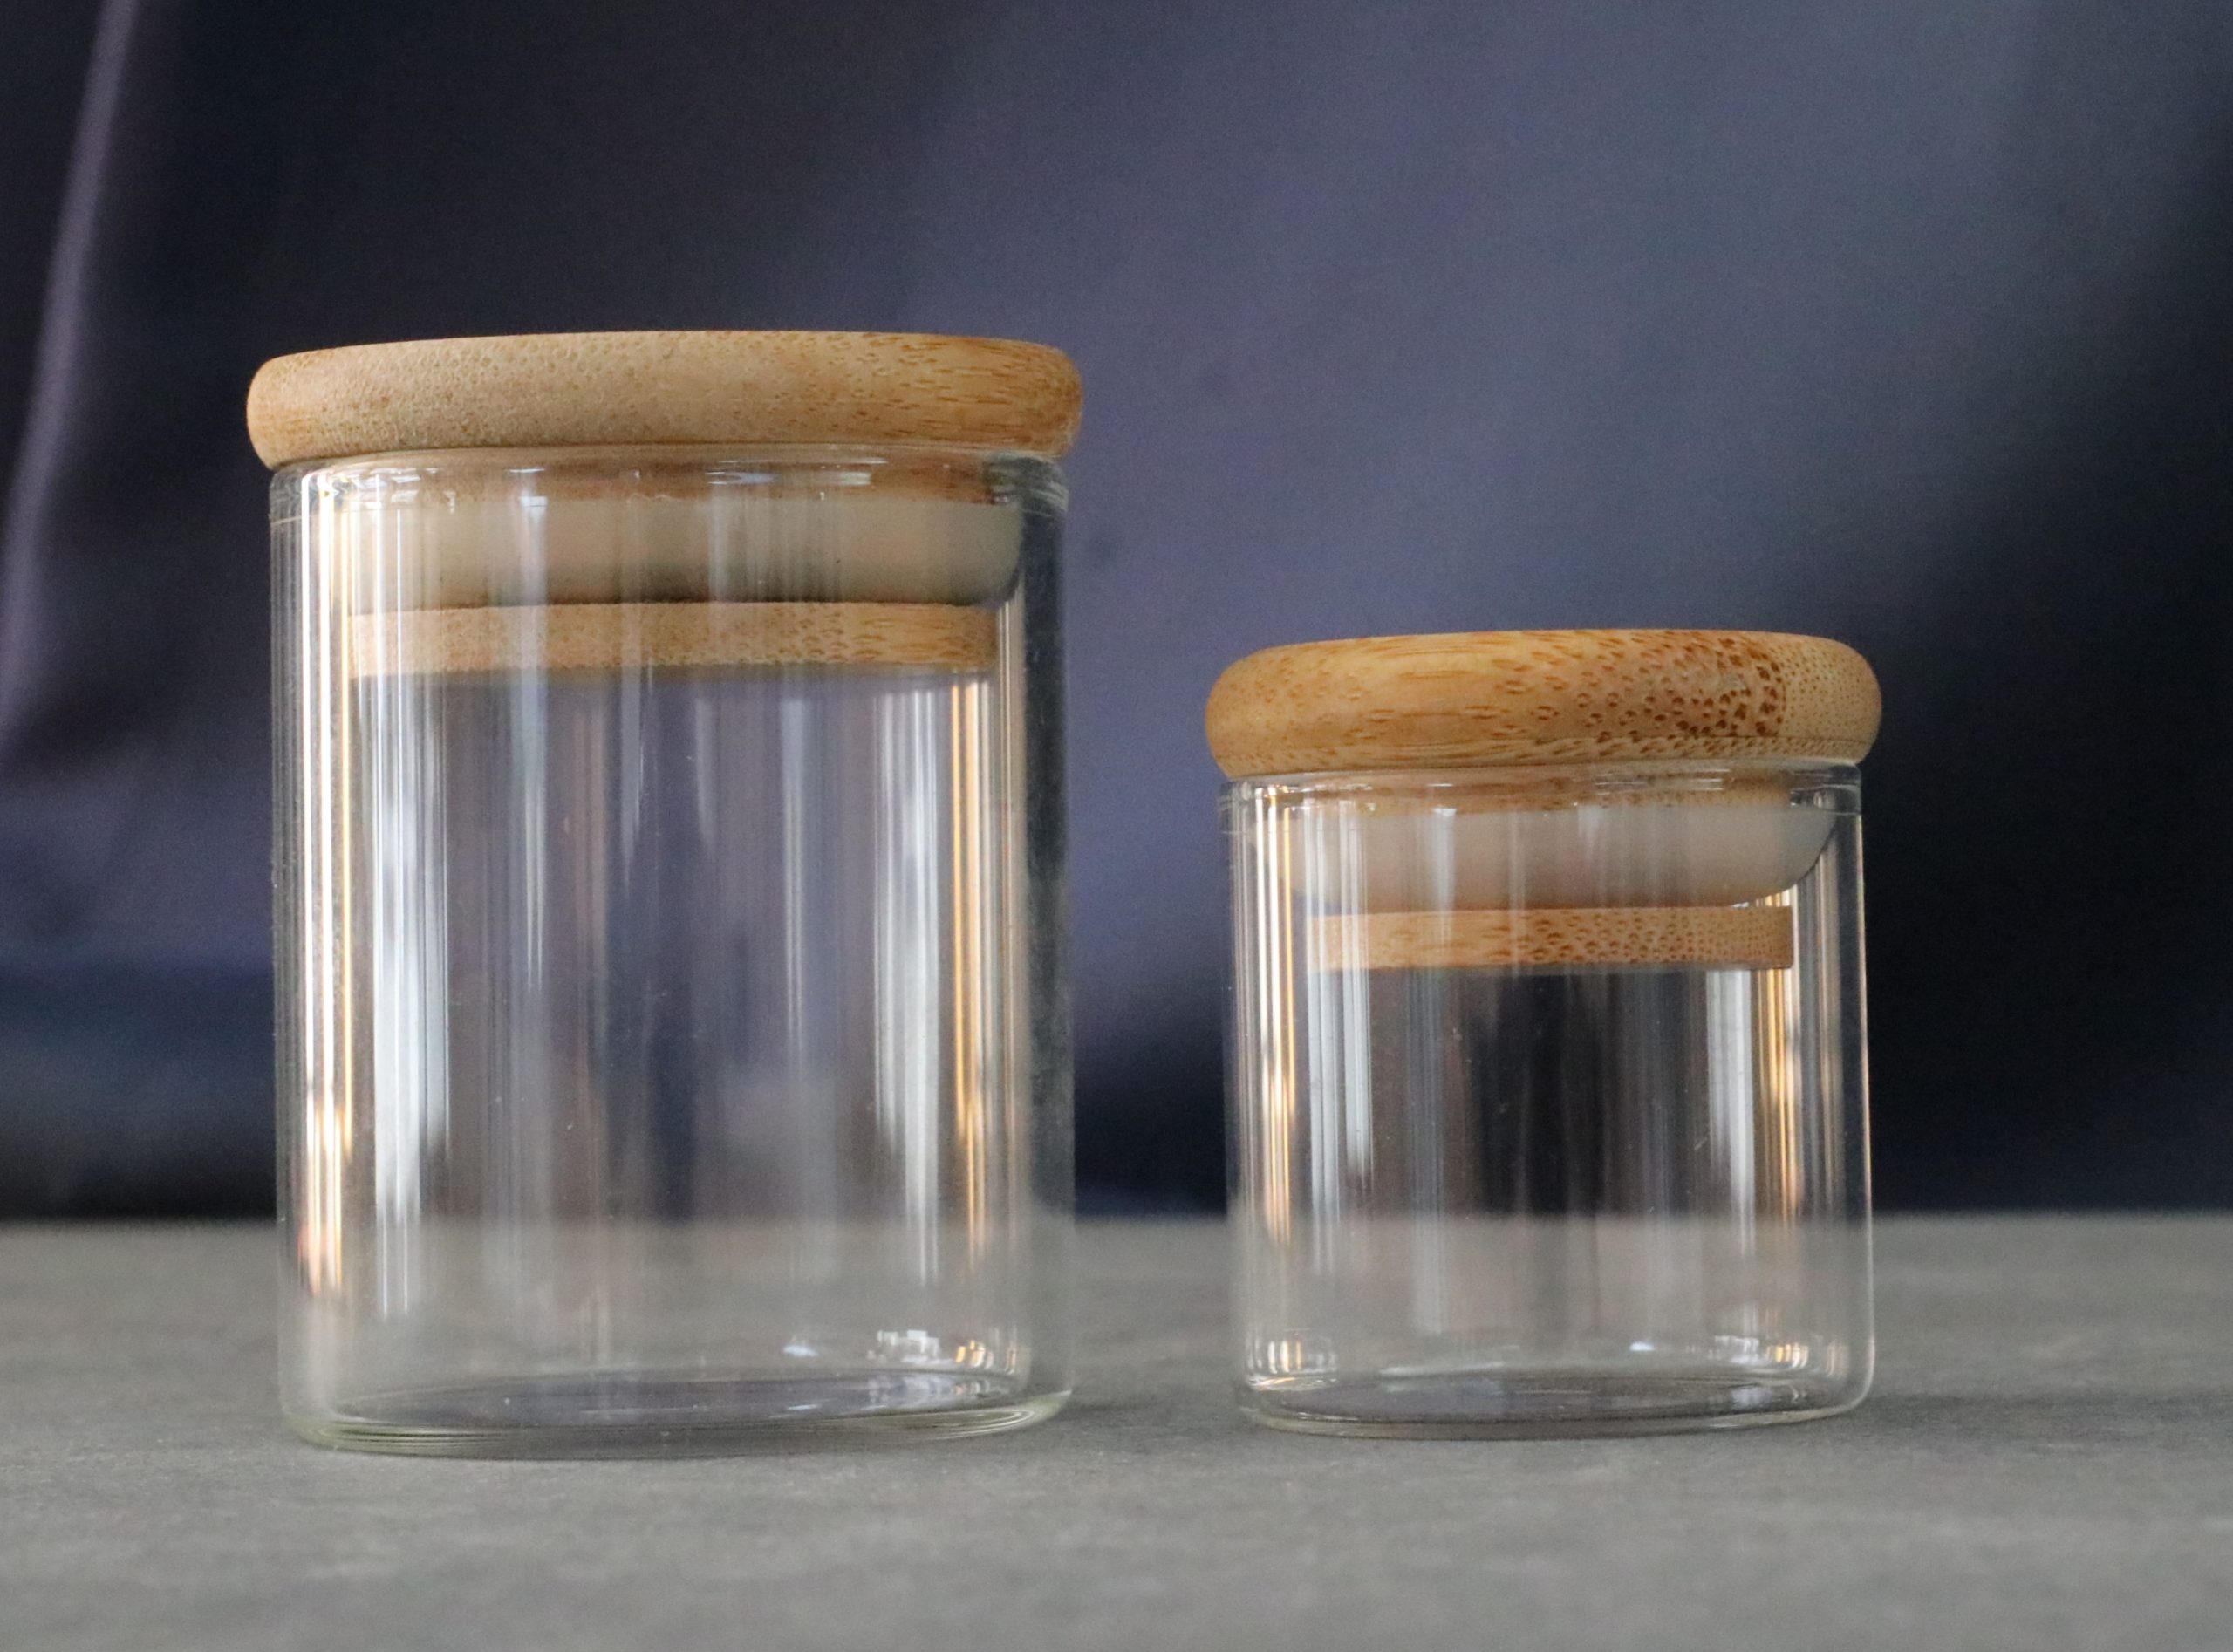 Bamboo, Glass Jars with Bamboo Lids